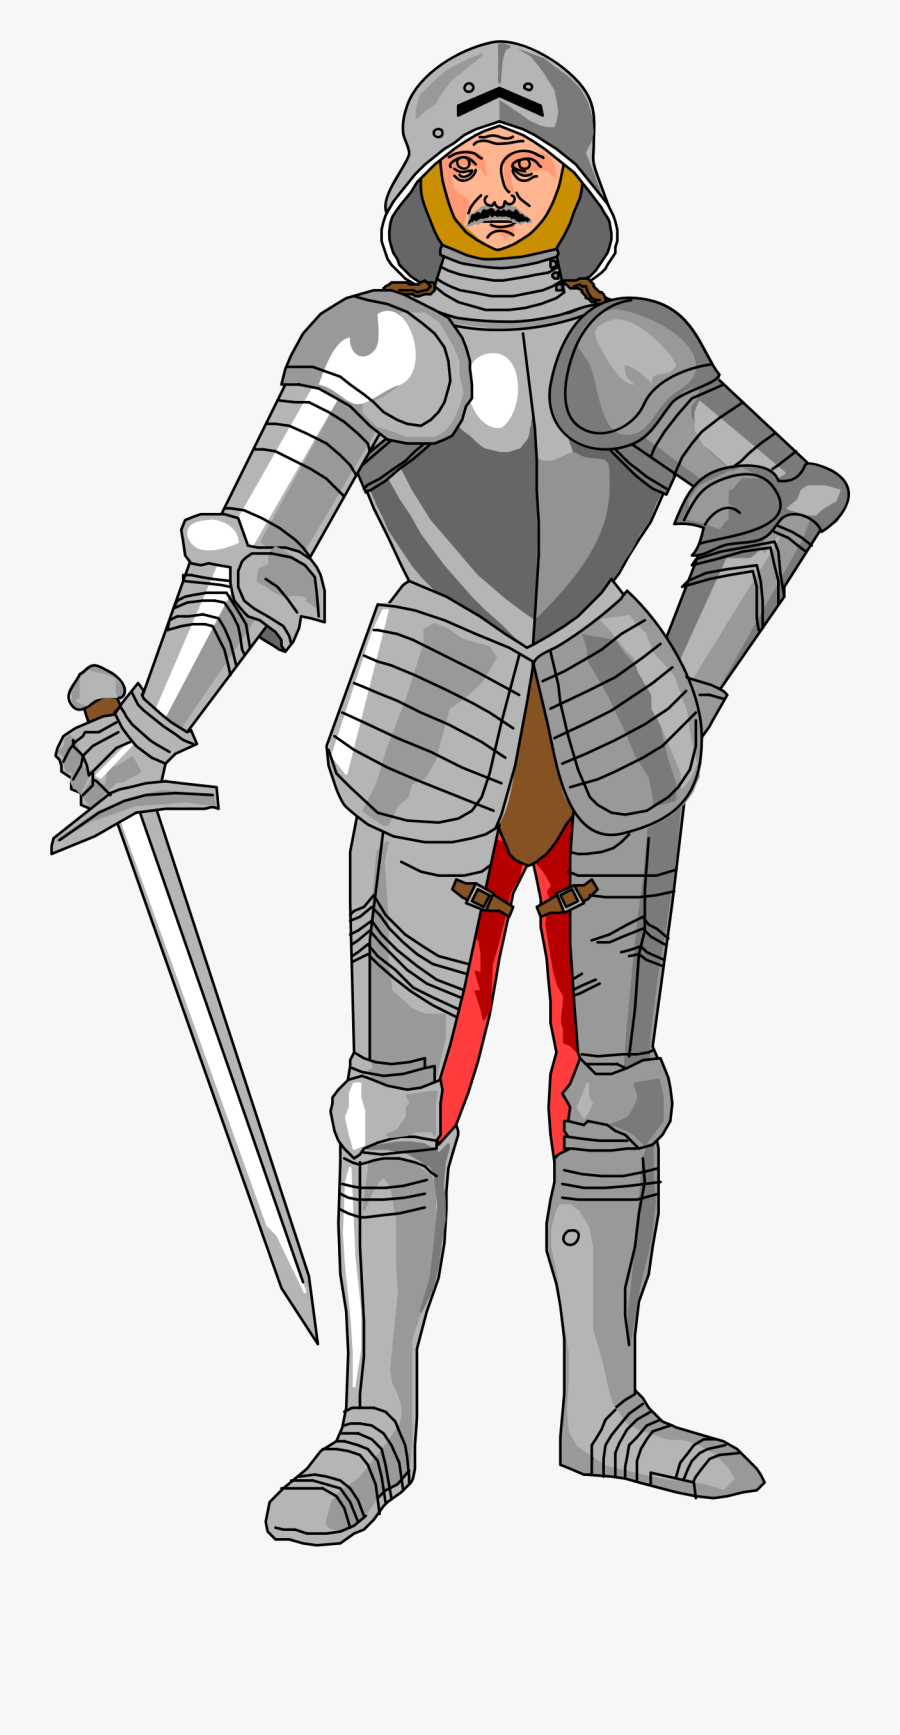 Jury Clipart Medieval - Knight Middle Ages Clipart, Transparent Clipart